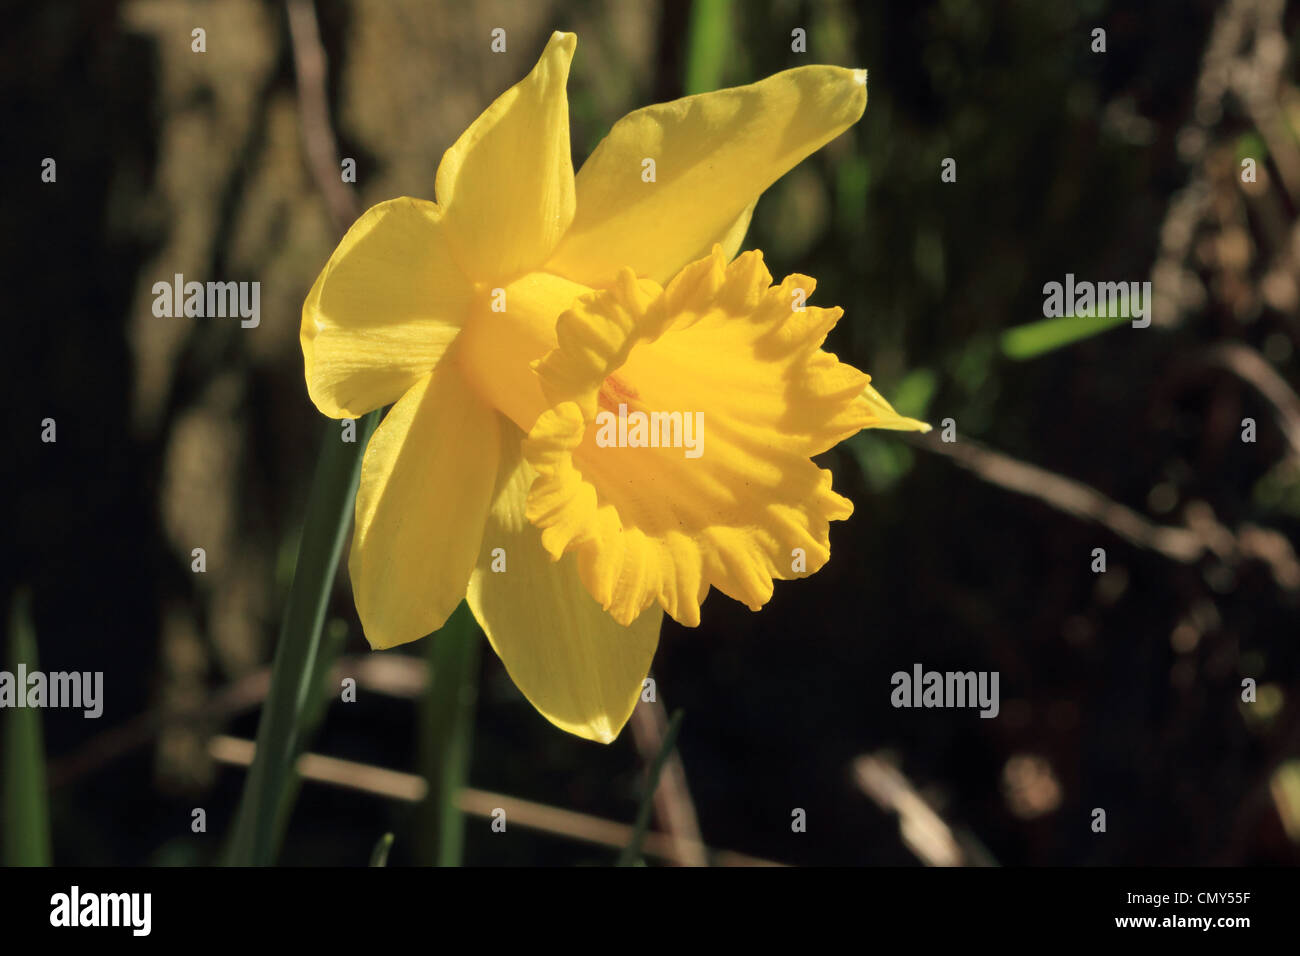 Daffodil Narcissus A yellow Spring Flower Stock Photo